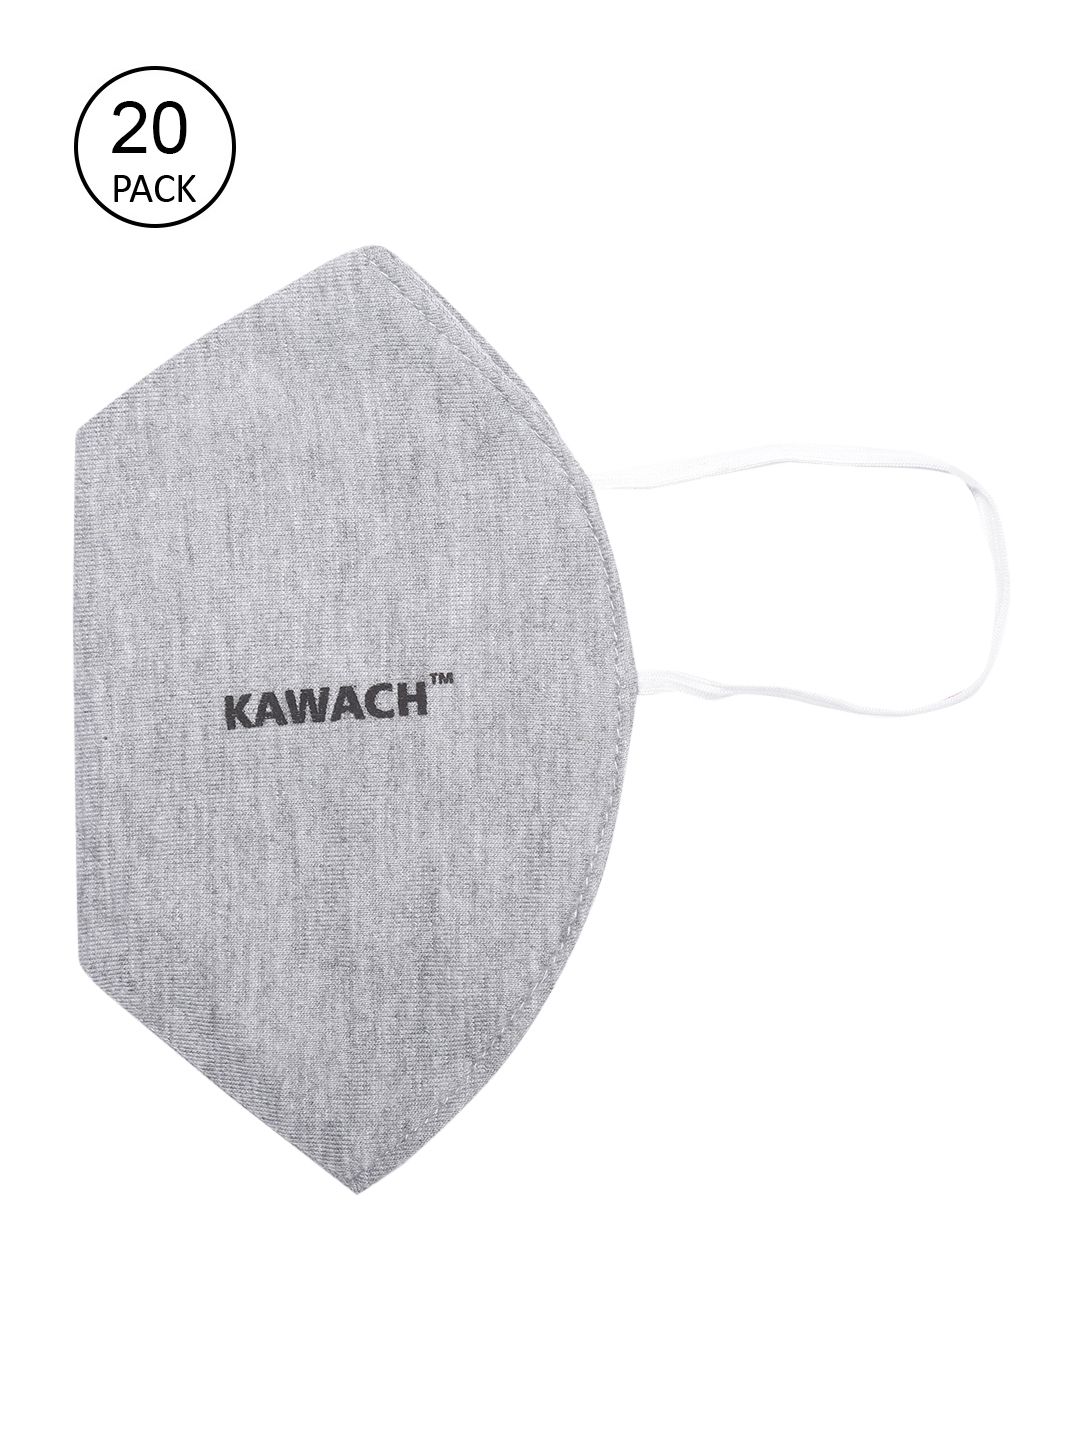 Kawach Unisex Pack of 20 Solid Reusable Protective Anti-Allergic 3 Ply Cloth Face Mask Price in India